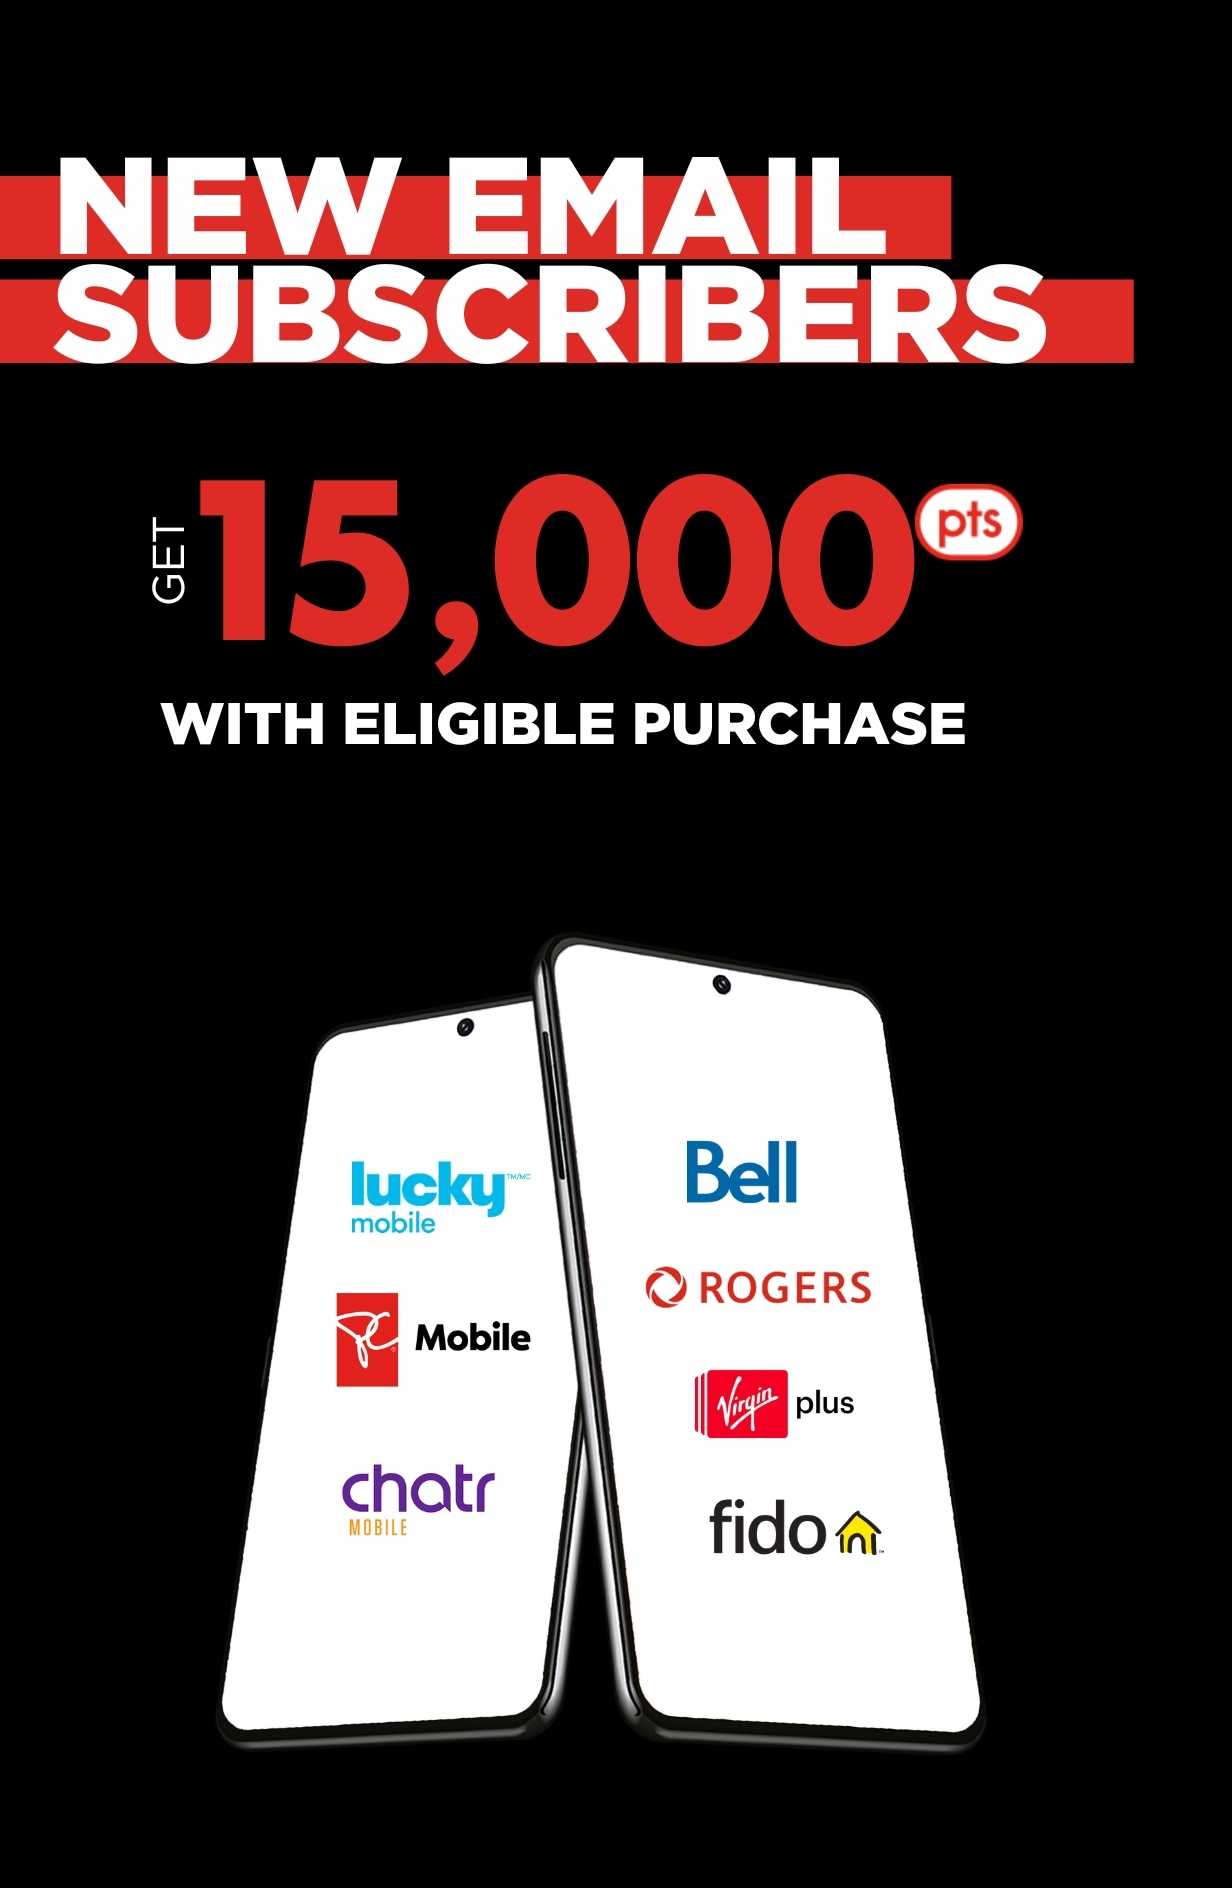 New Email Subscribers Get a Bonus 15,000 points with eligible purchase* - *When you purchase a new device with a new 2-year plan activation within 30 days of email sign-up.